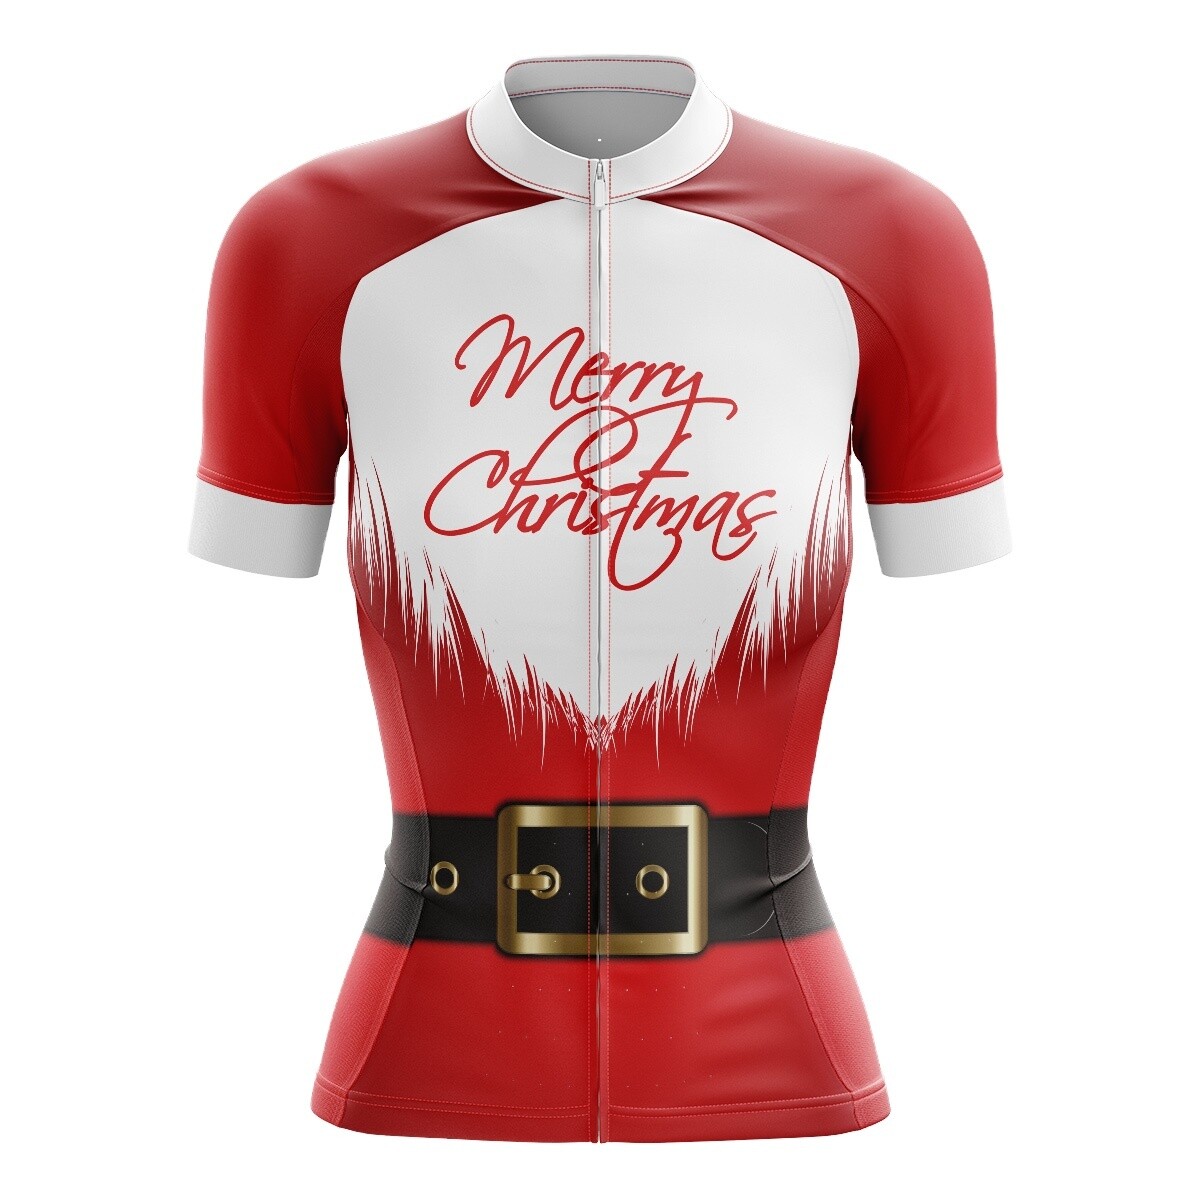 HIRBGOD Womens Christmas Cycling Shirt Mountain Bike Clothes Bicycle Equipment Gym Outdoor Breathable Formal Wear